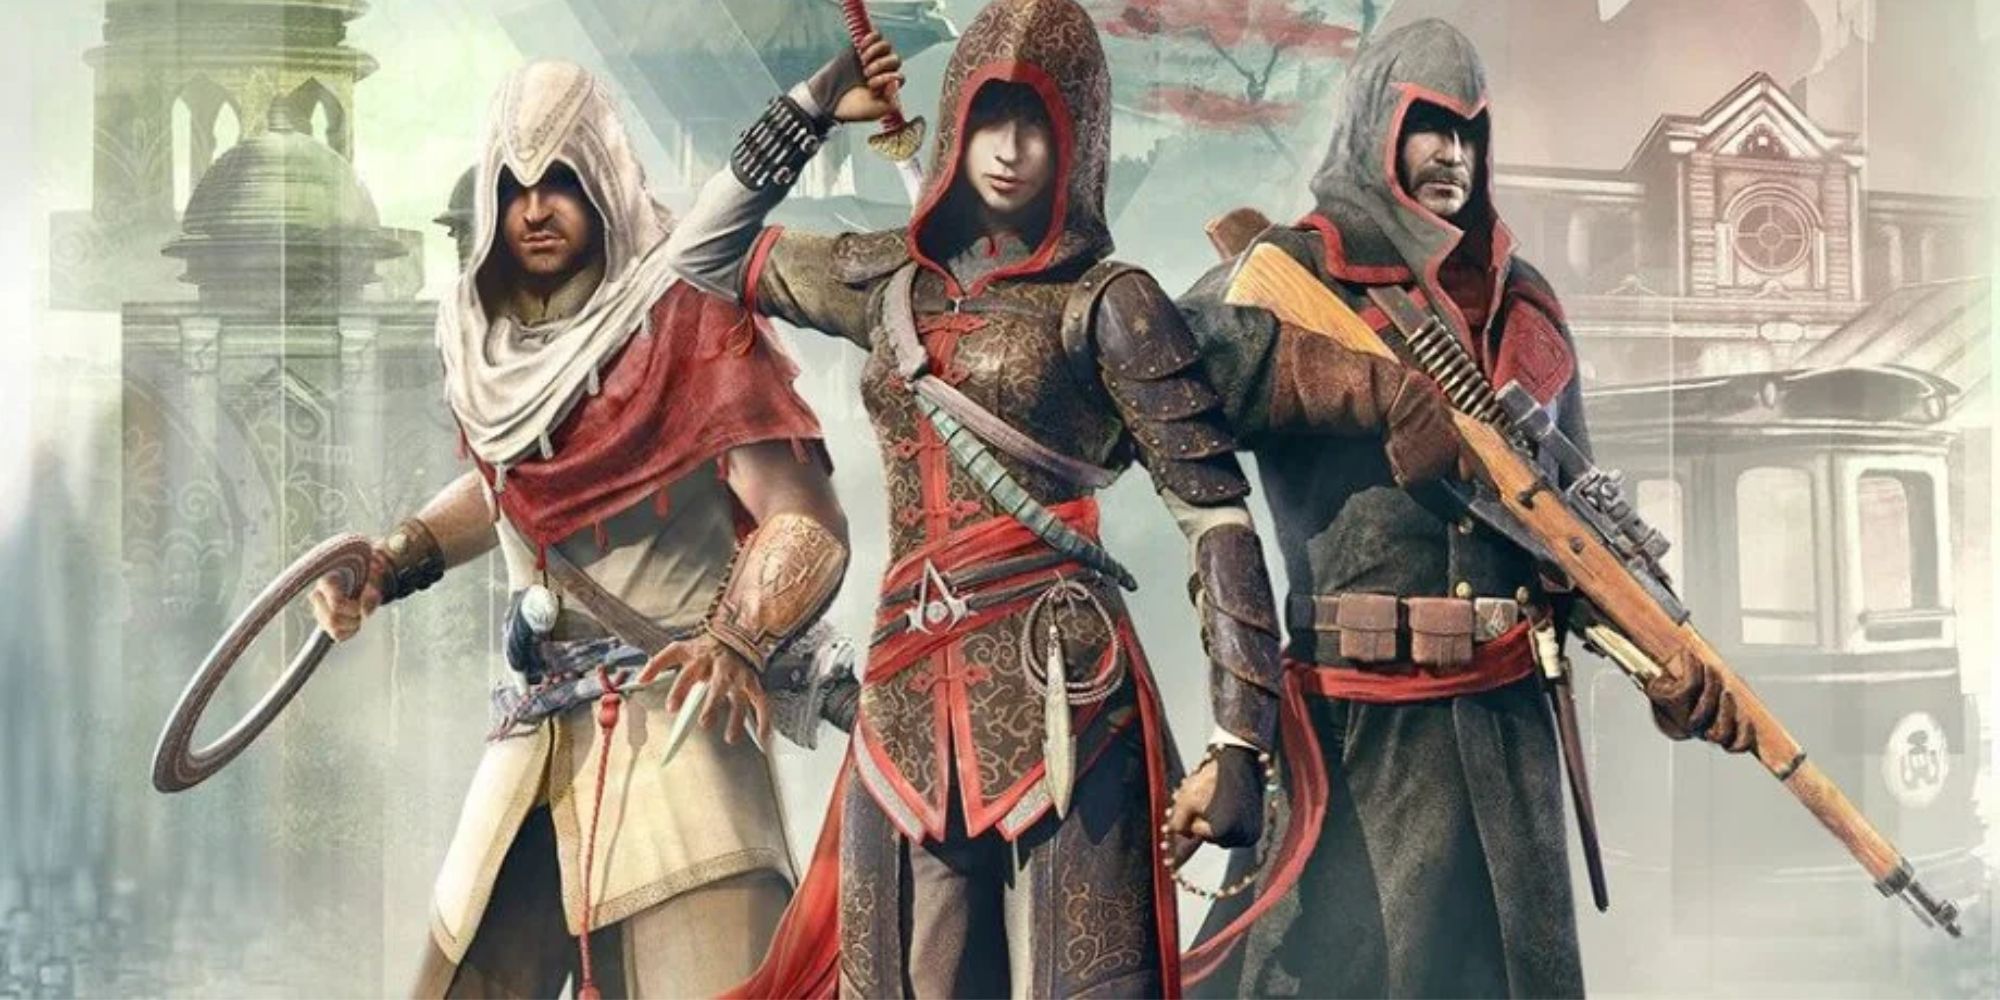 Blakwoodz on X: Ubisoft's E3 2023 is arriving, What are you guys the most  excited for? Assassin's Creed Mirage Assassin's Creed Nexus The Division  Heartland XDefiant Avatar Frontiers of Pandora Skull &